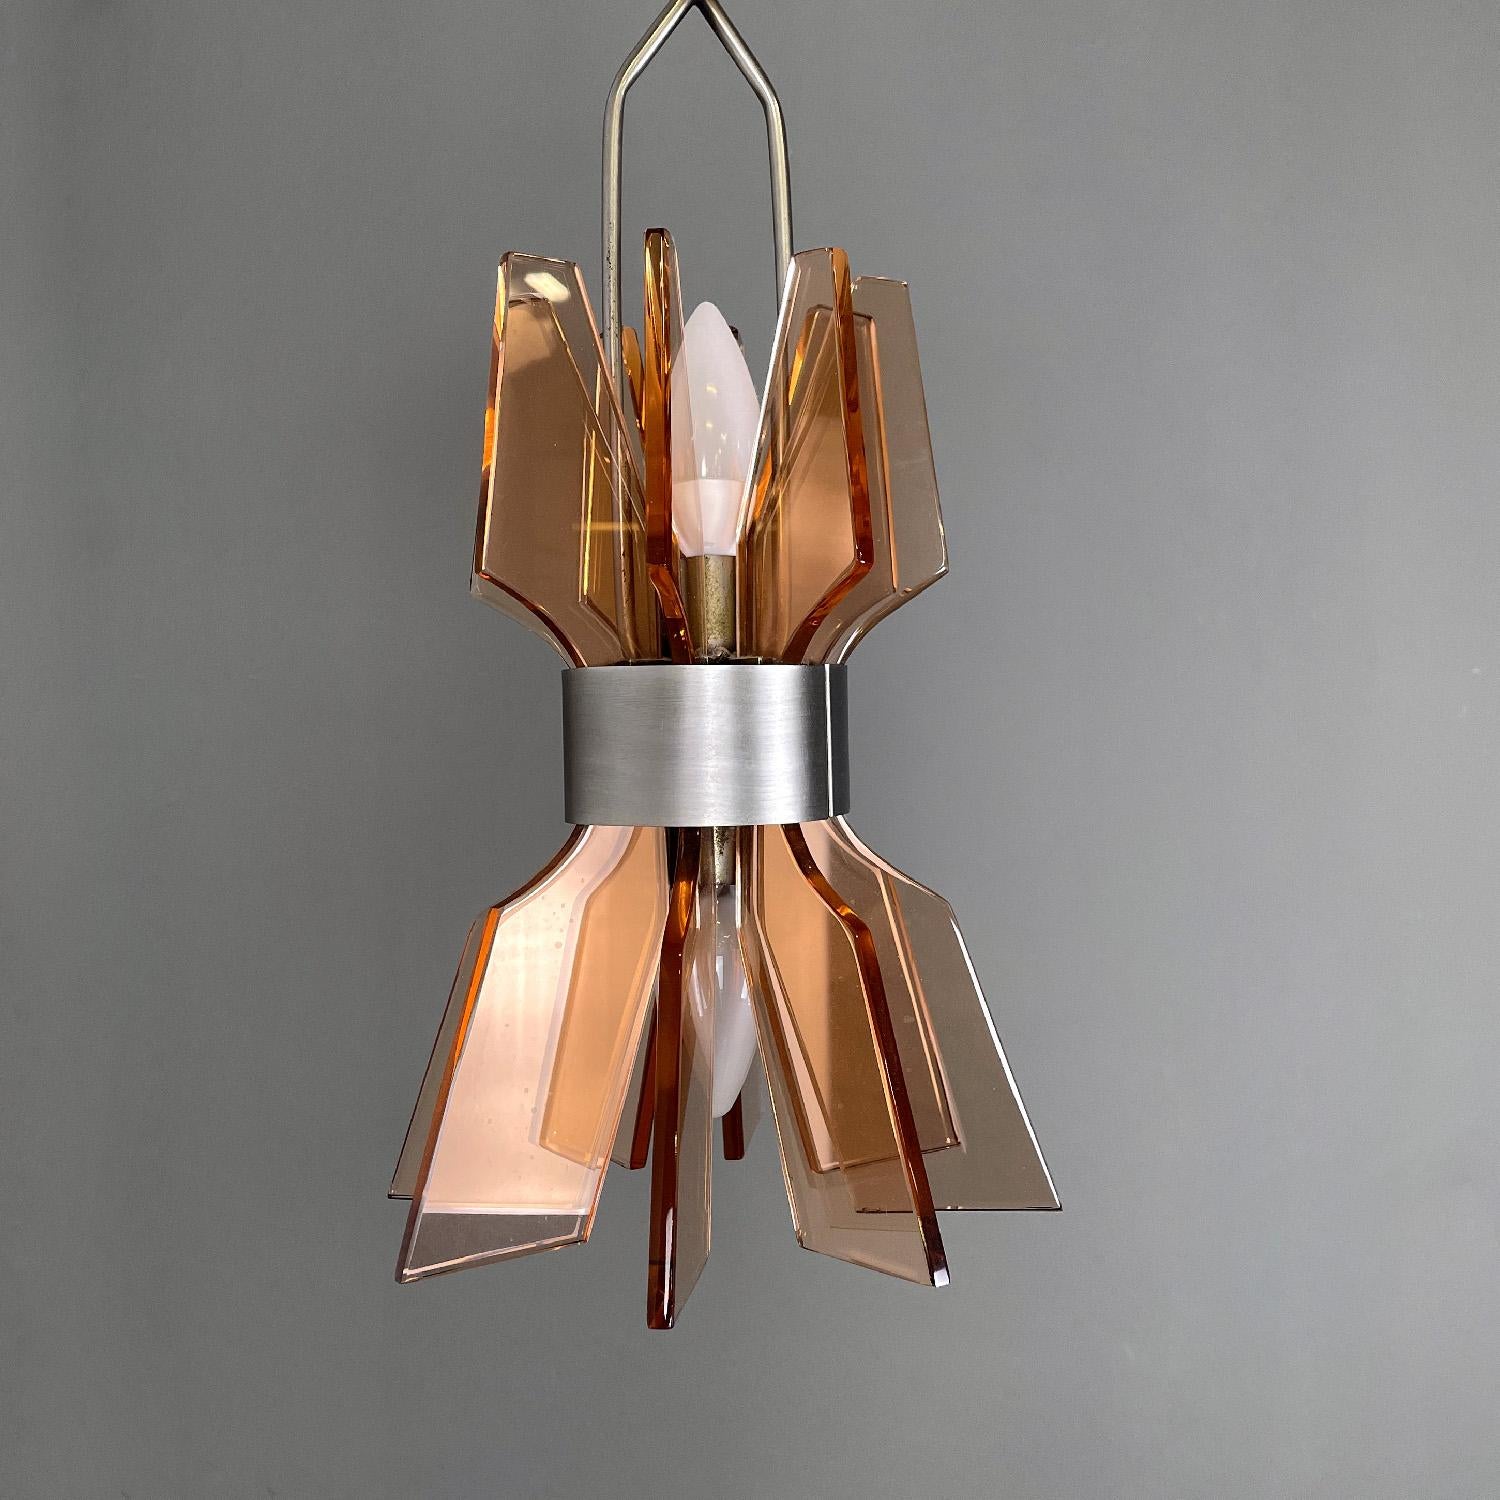 Italian mid-century modern chandelier in peach pink glass and metal, 1960s For Sale 2